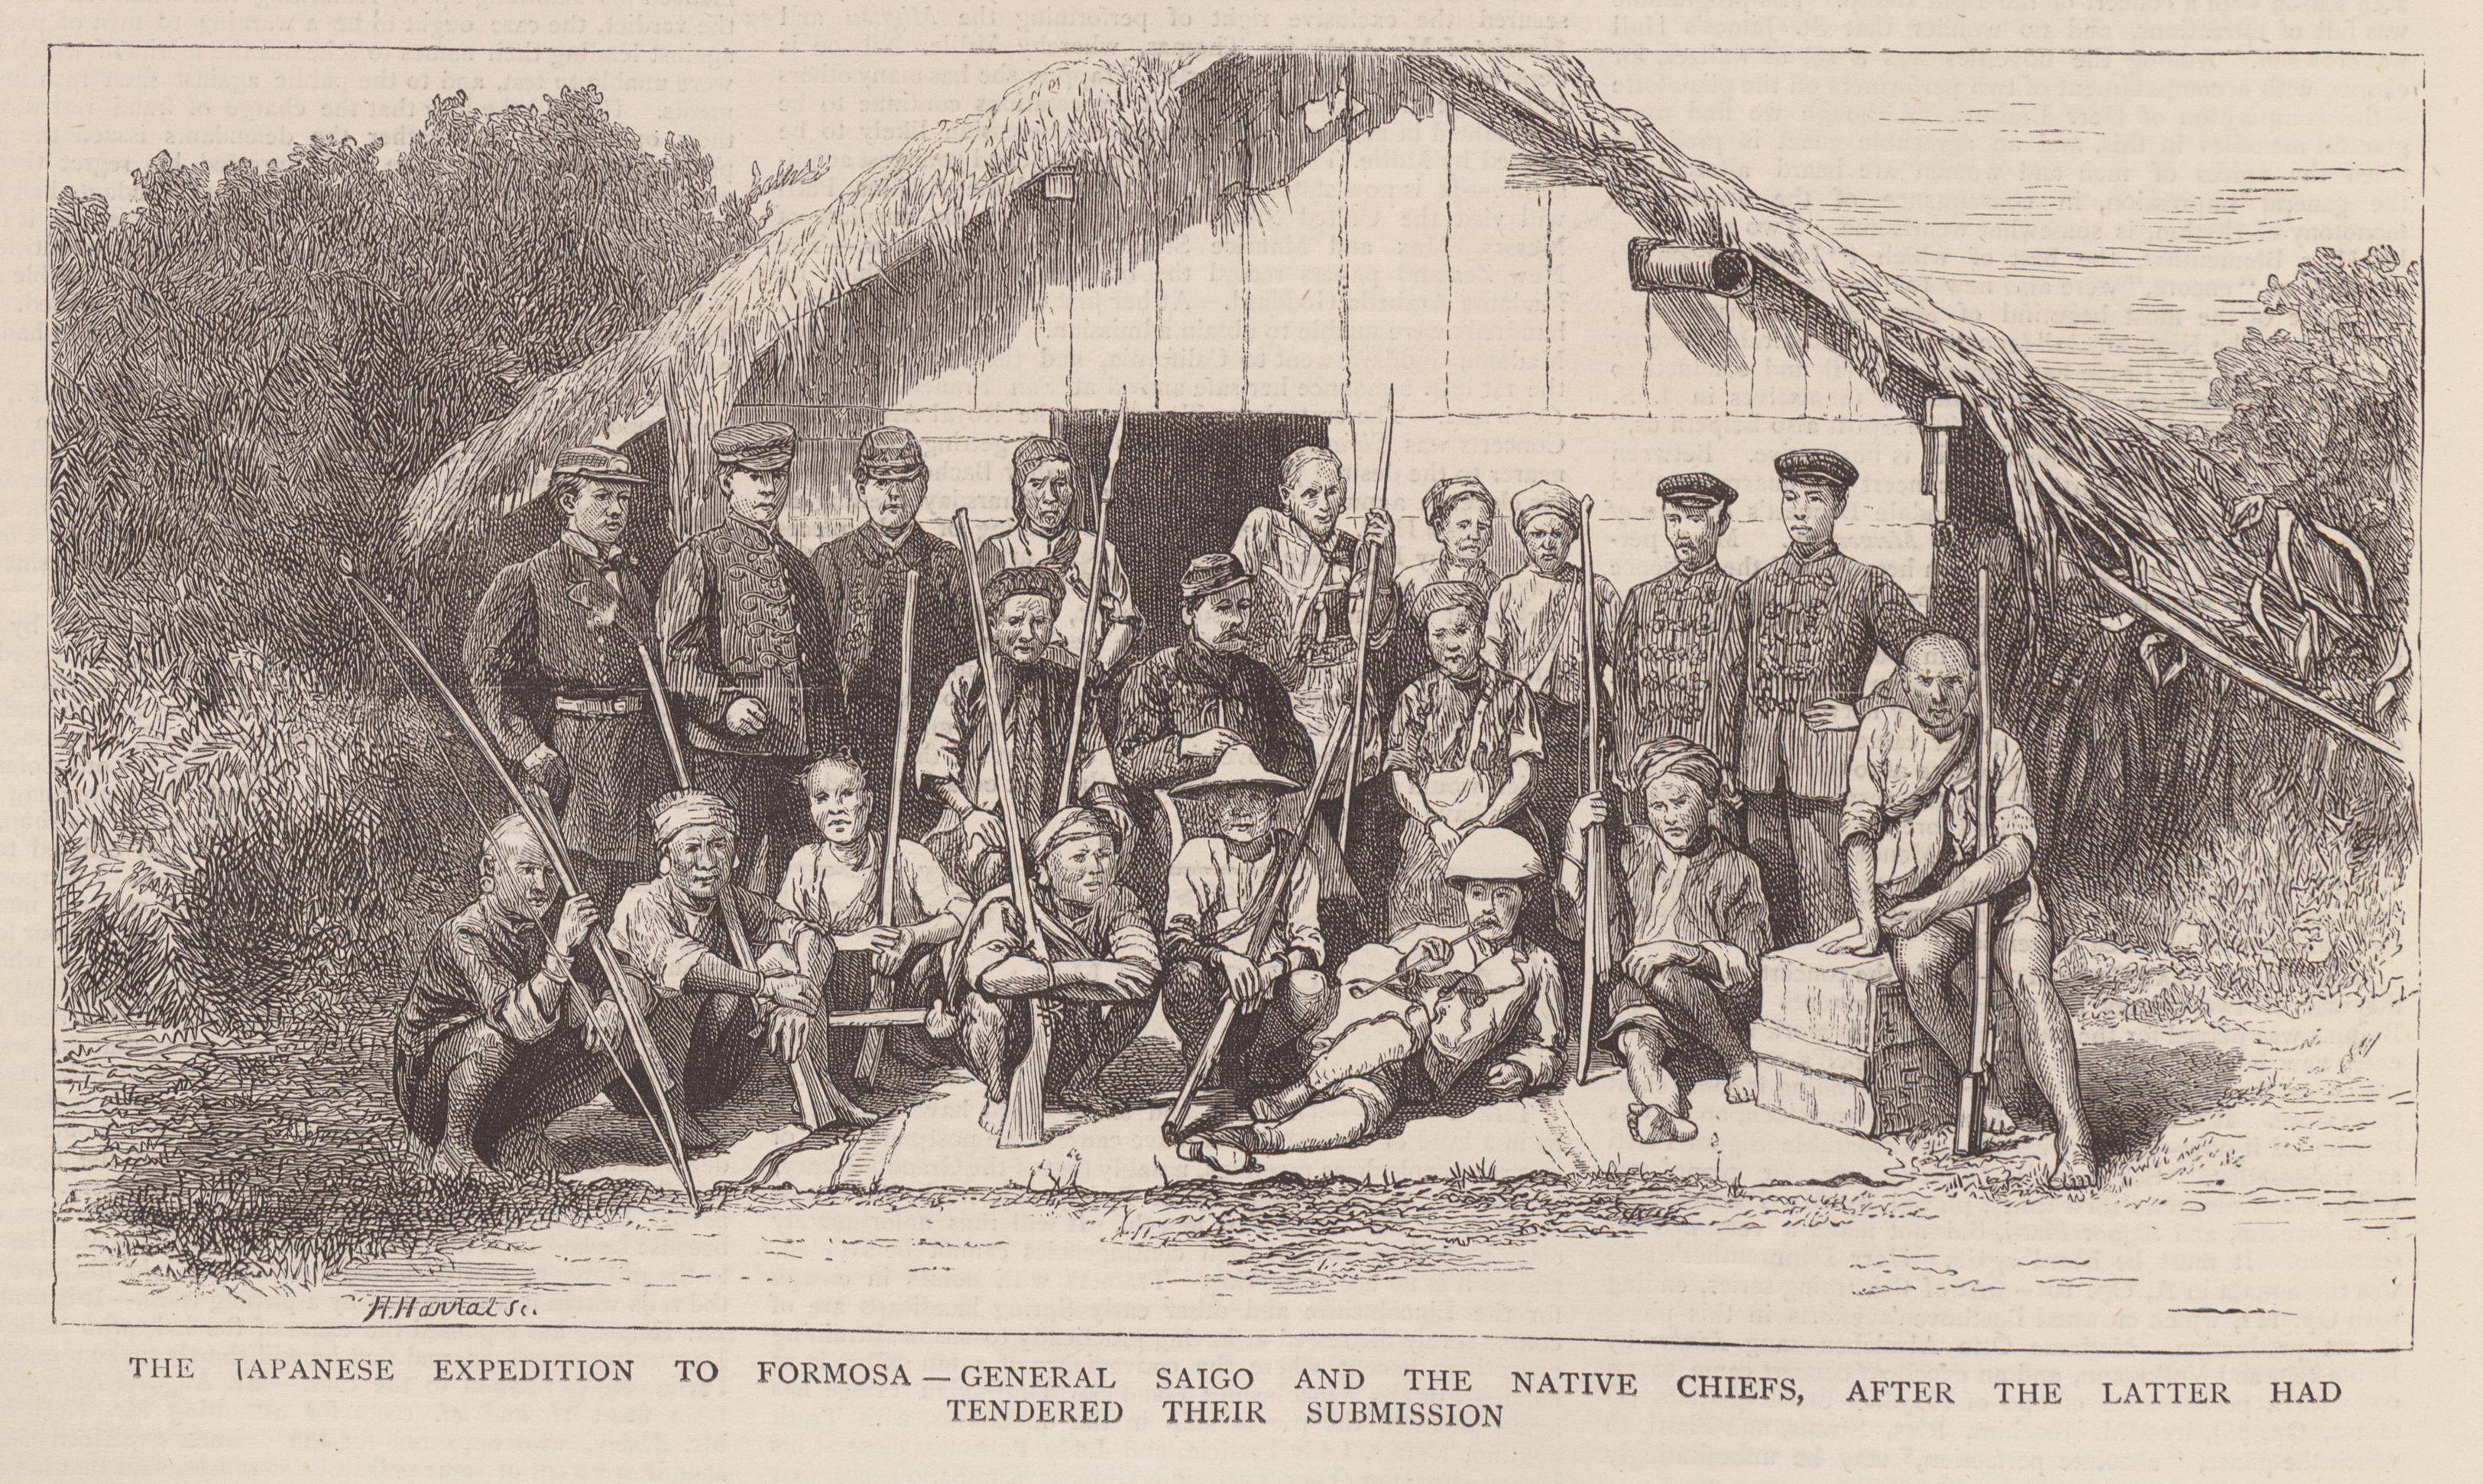 formosa-the-japanese-expedition-to-formosa-general-saigo-and-the-native-chiefs-after-the-latter-had-tendered-their-submission